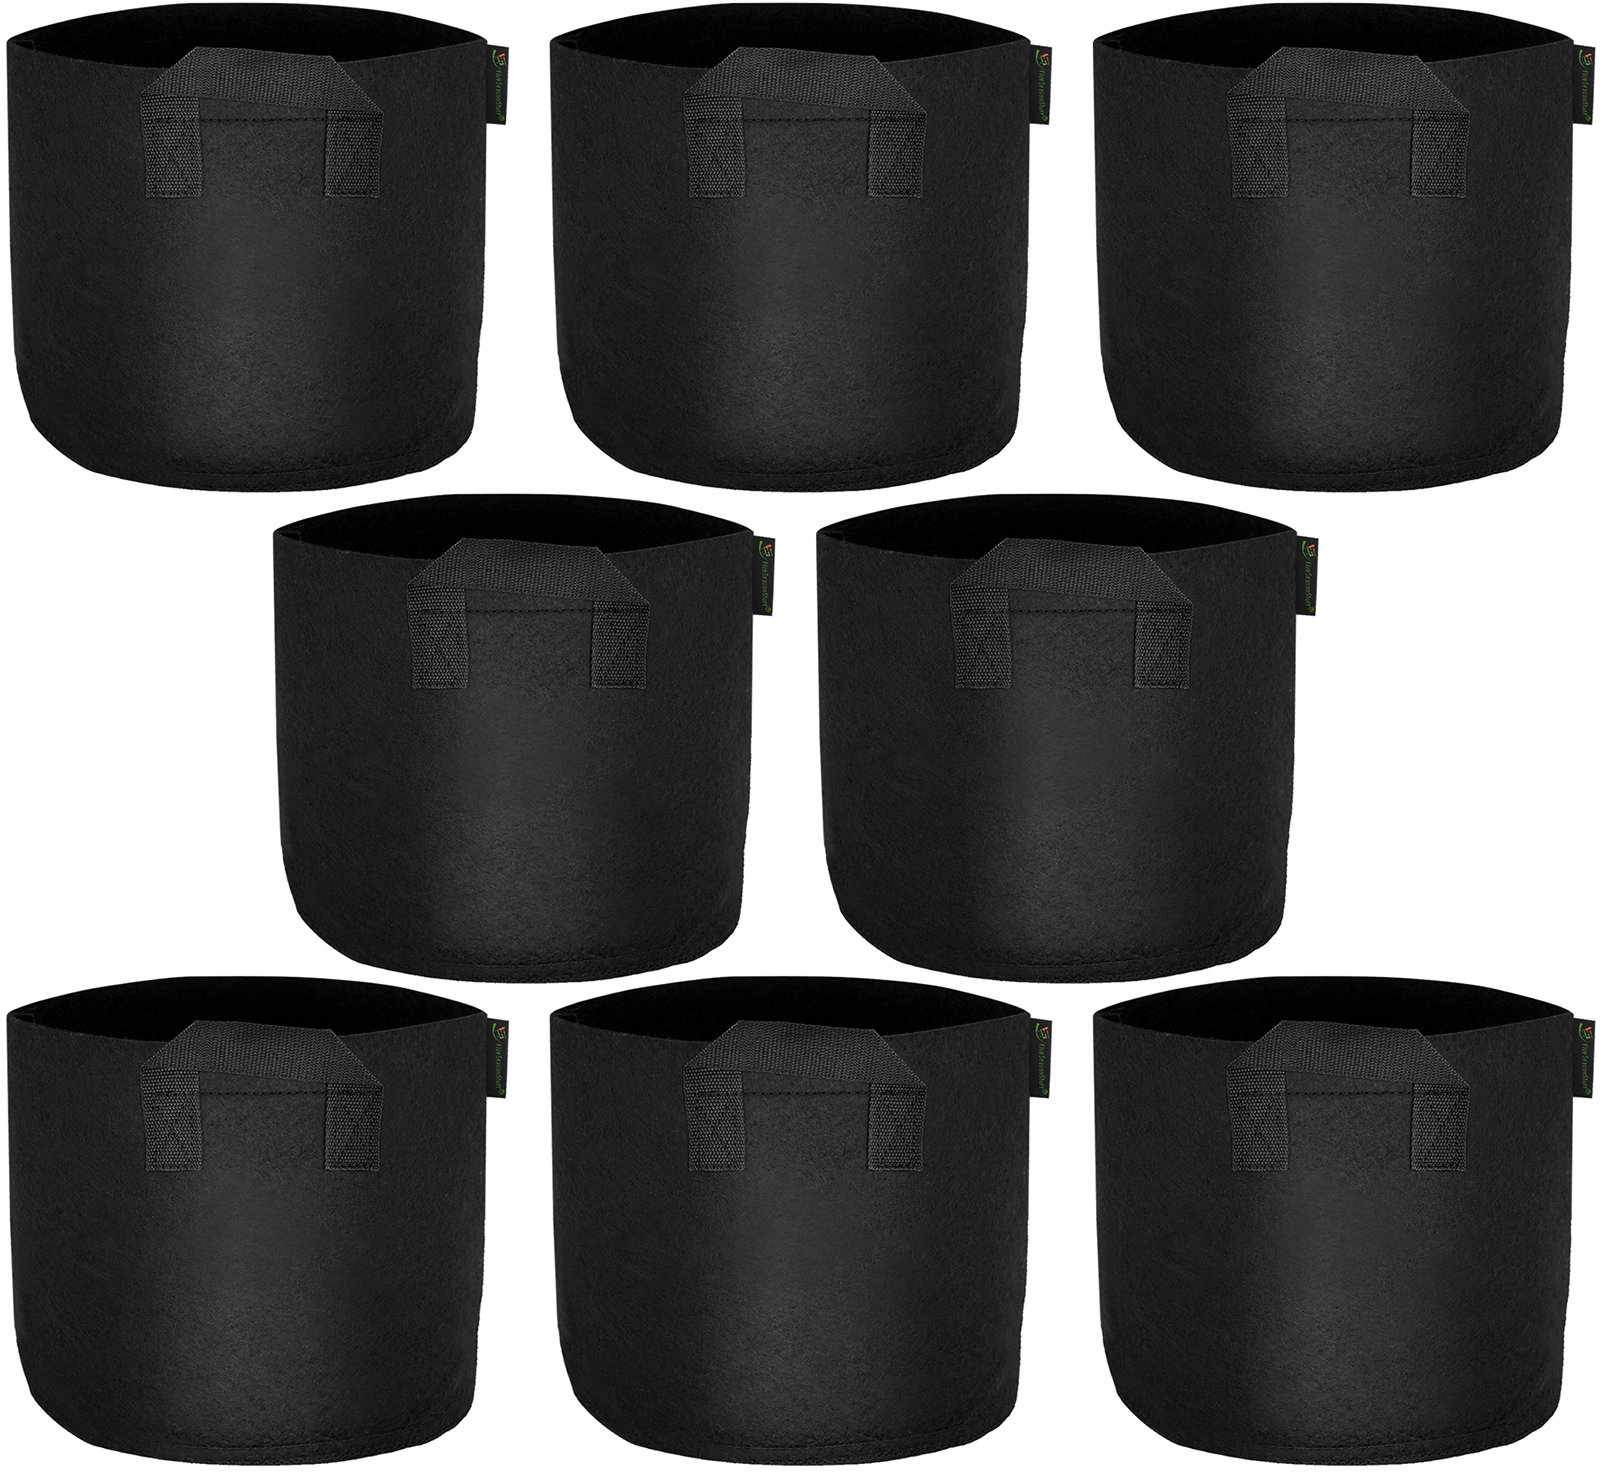  Gardzen 20-Pack 10 Gallon Grow Bags, Aeration Fabric Pots with  Handles, Pot for Plants : Everything Else